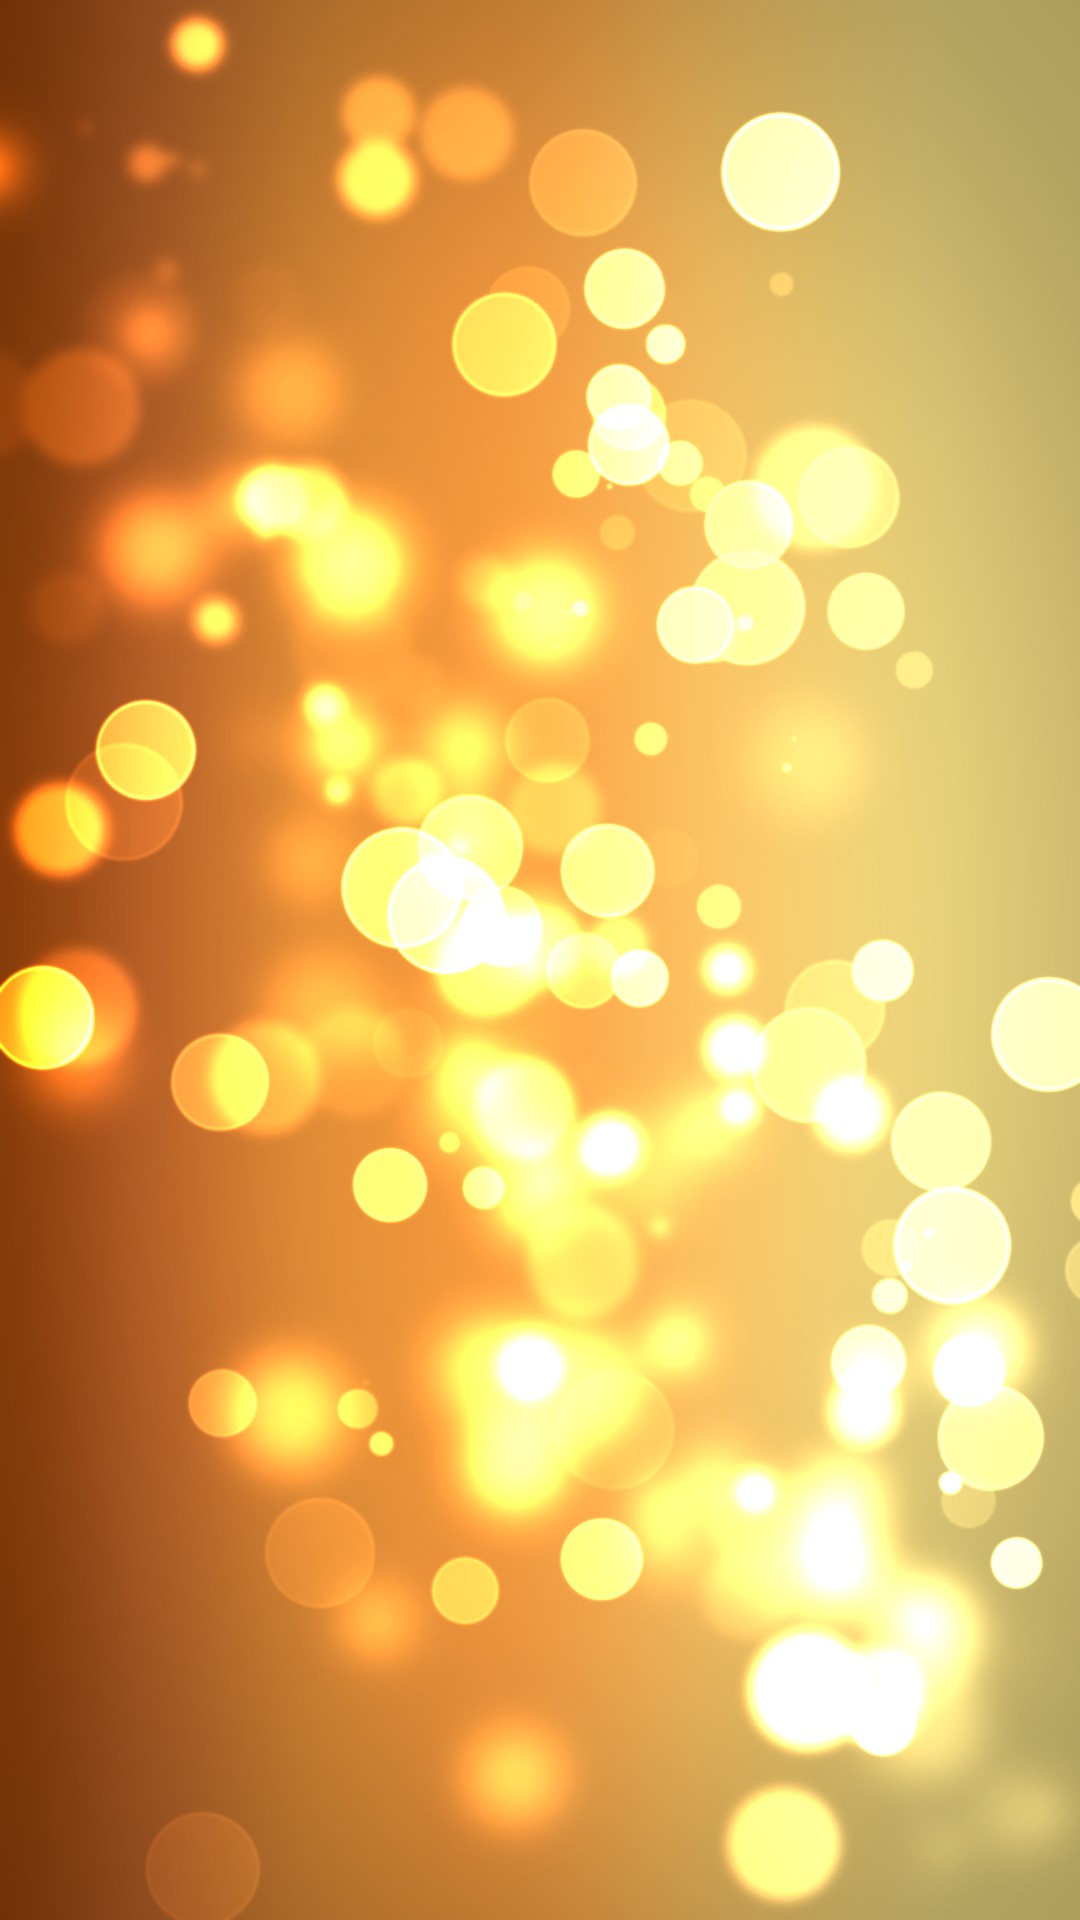 Gold Sparkle Wallpaper For iPhone resolution 1080x1920